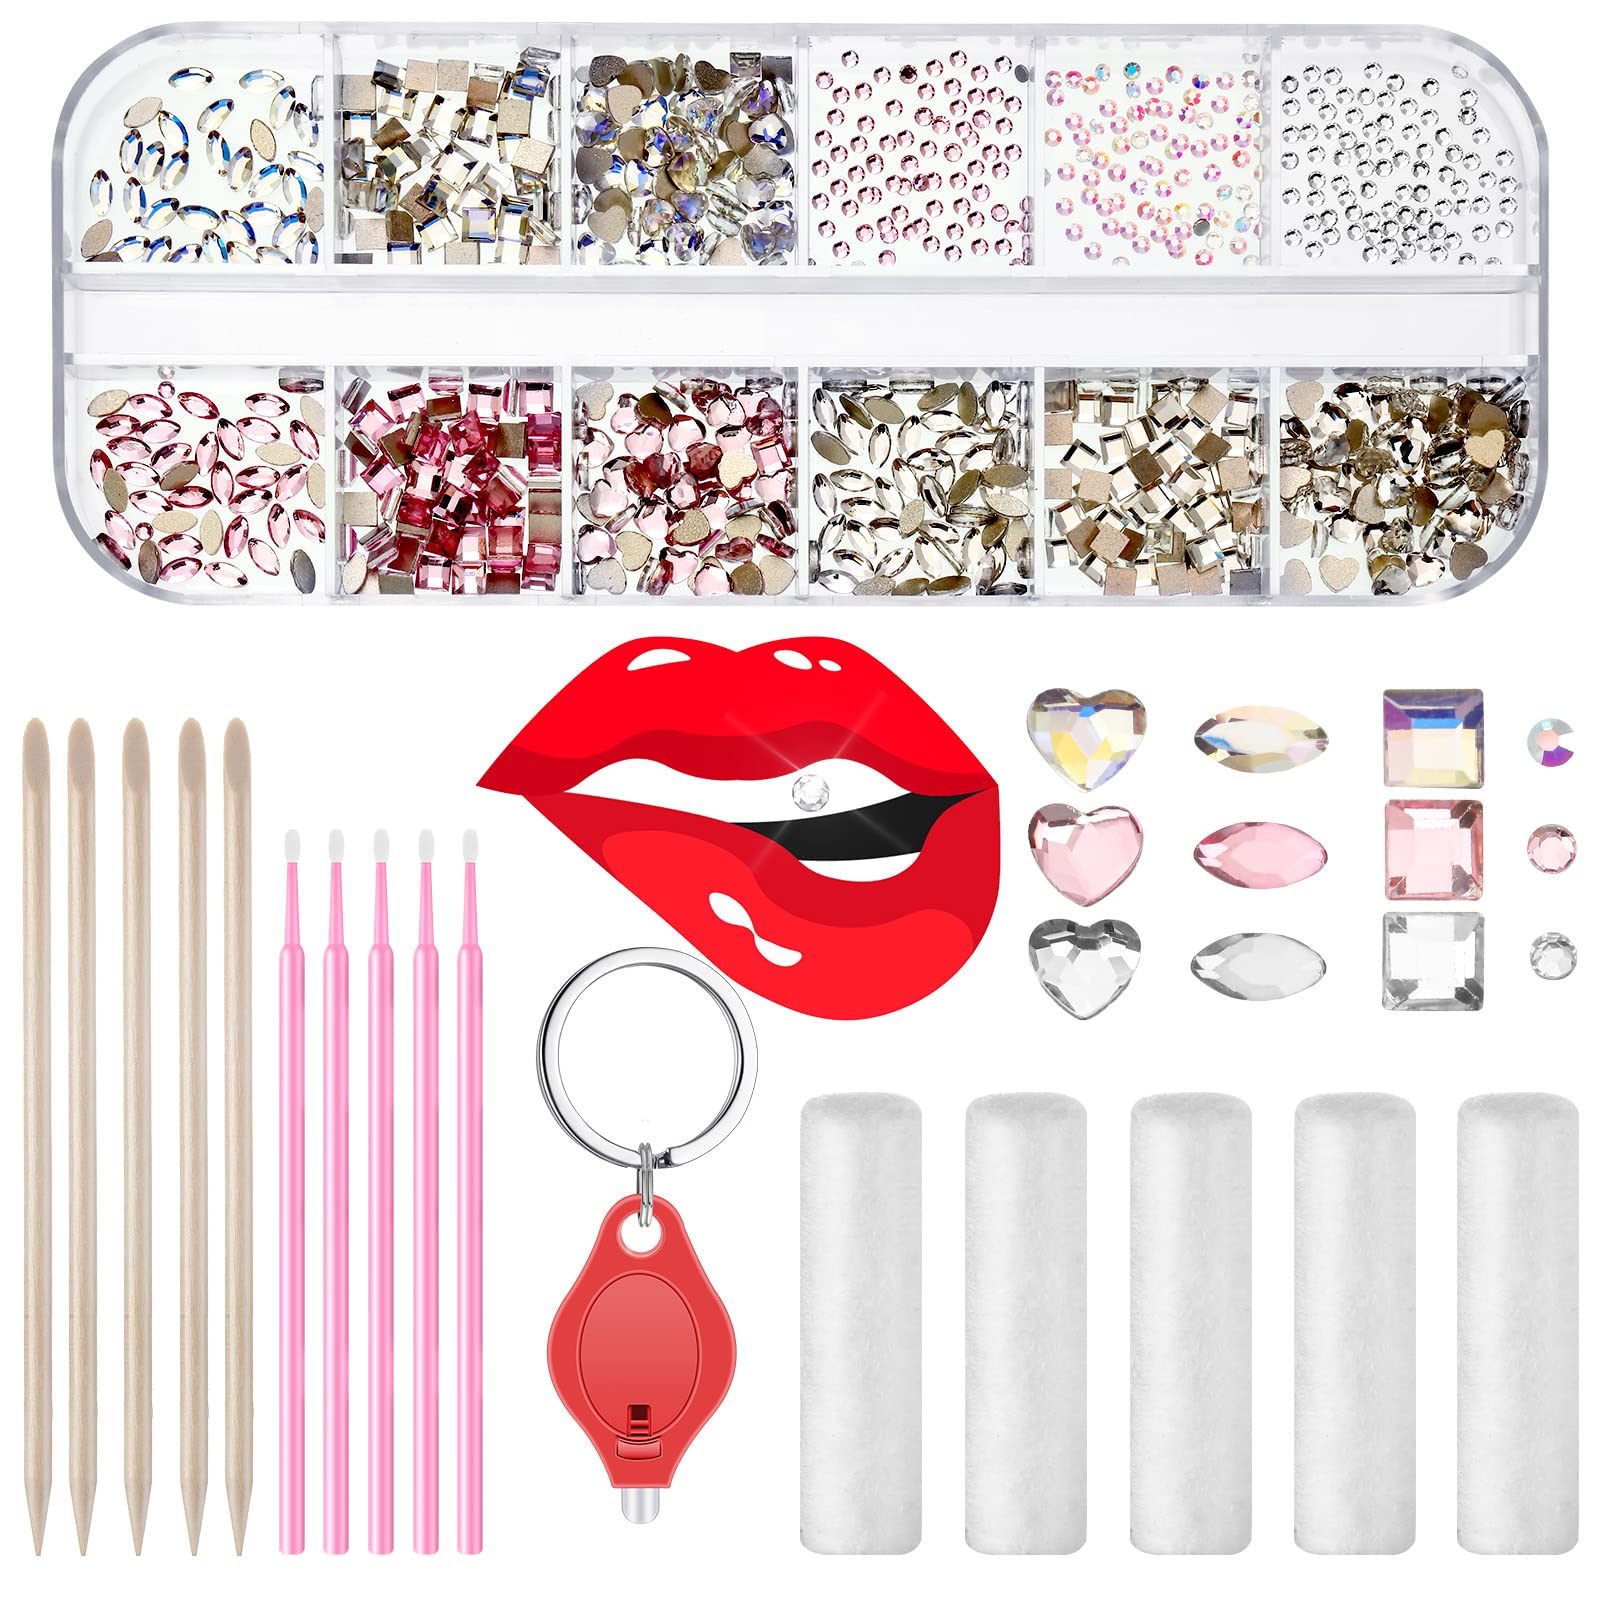 Tooth Gem Kit, Diy Tooth Gem Kit With Curing Light And Glue, Tooth Gems For  Reflective Tooth Adornment Decoration